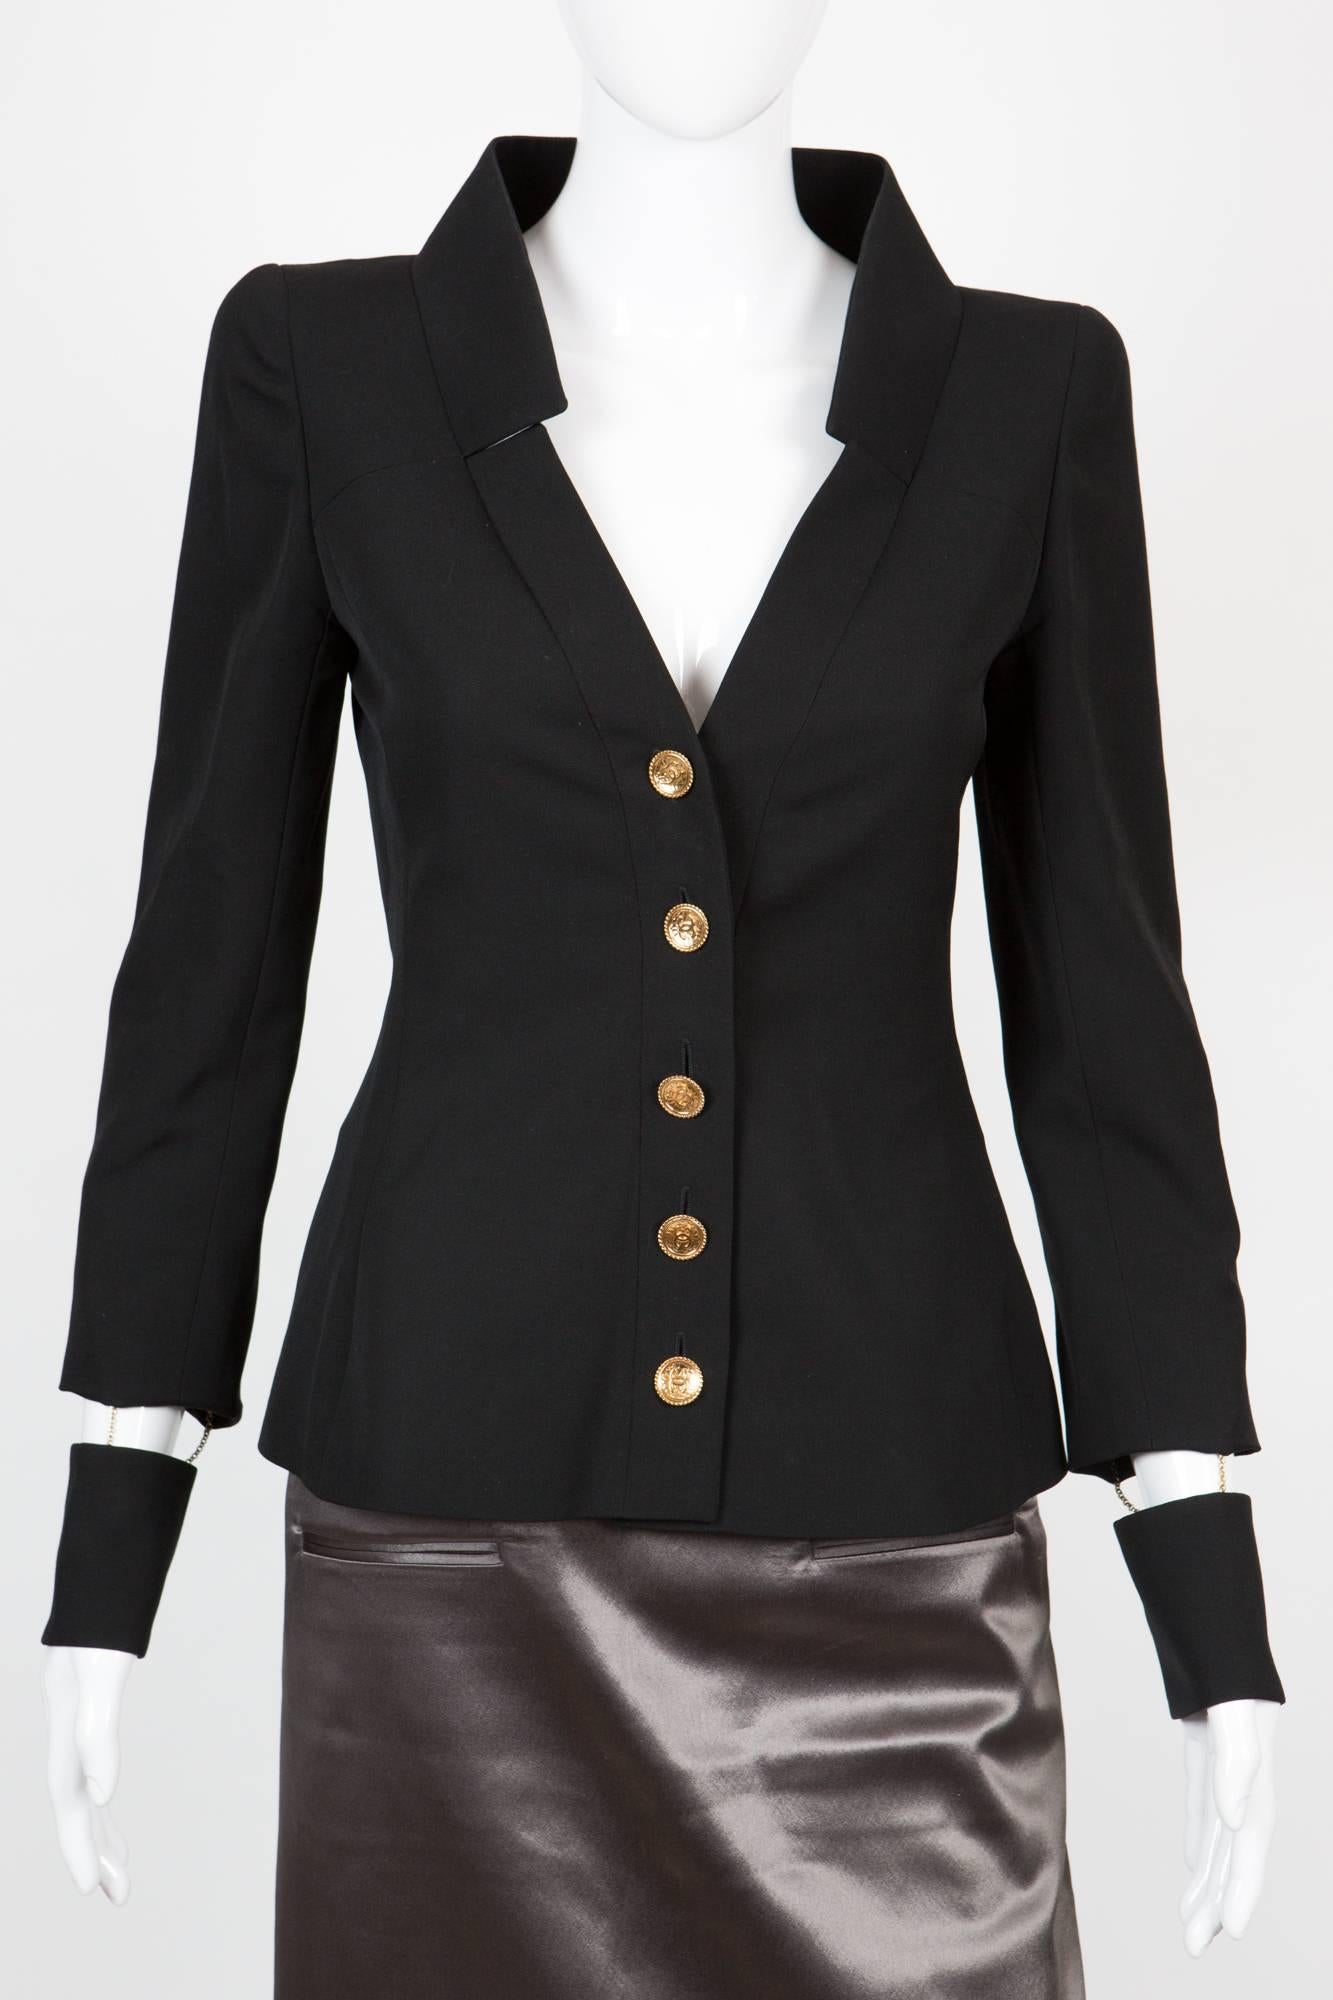 Stunning black Chanel wool jacket featuring a center front gold-tone logo buttons opening, a fancy cuff detail with logo buttons and gold tone chains to fix the cuff to the jacket, a silk logo lining, and a 24kt gilded gold hardware chain in the